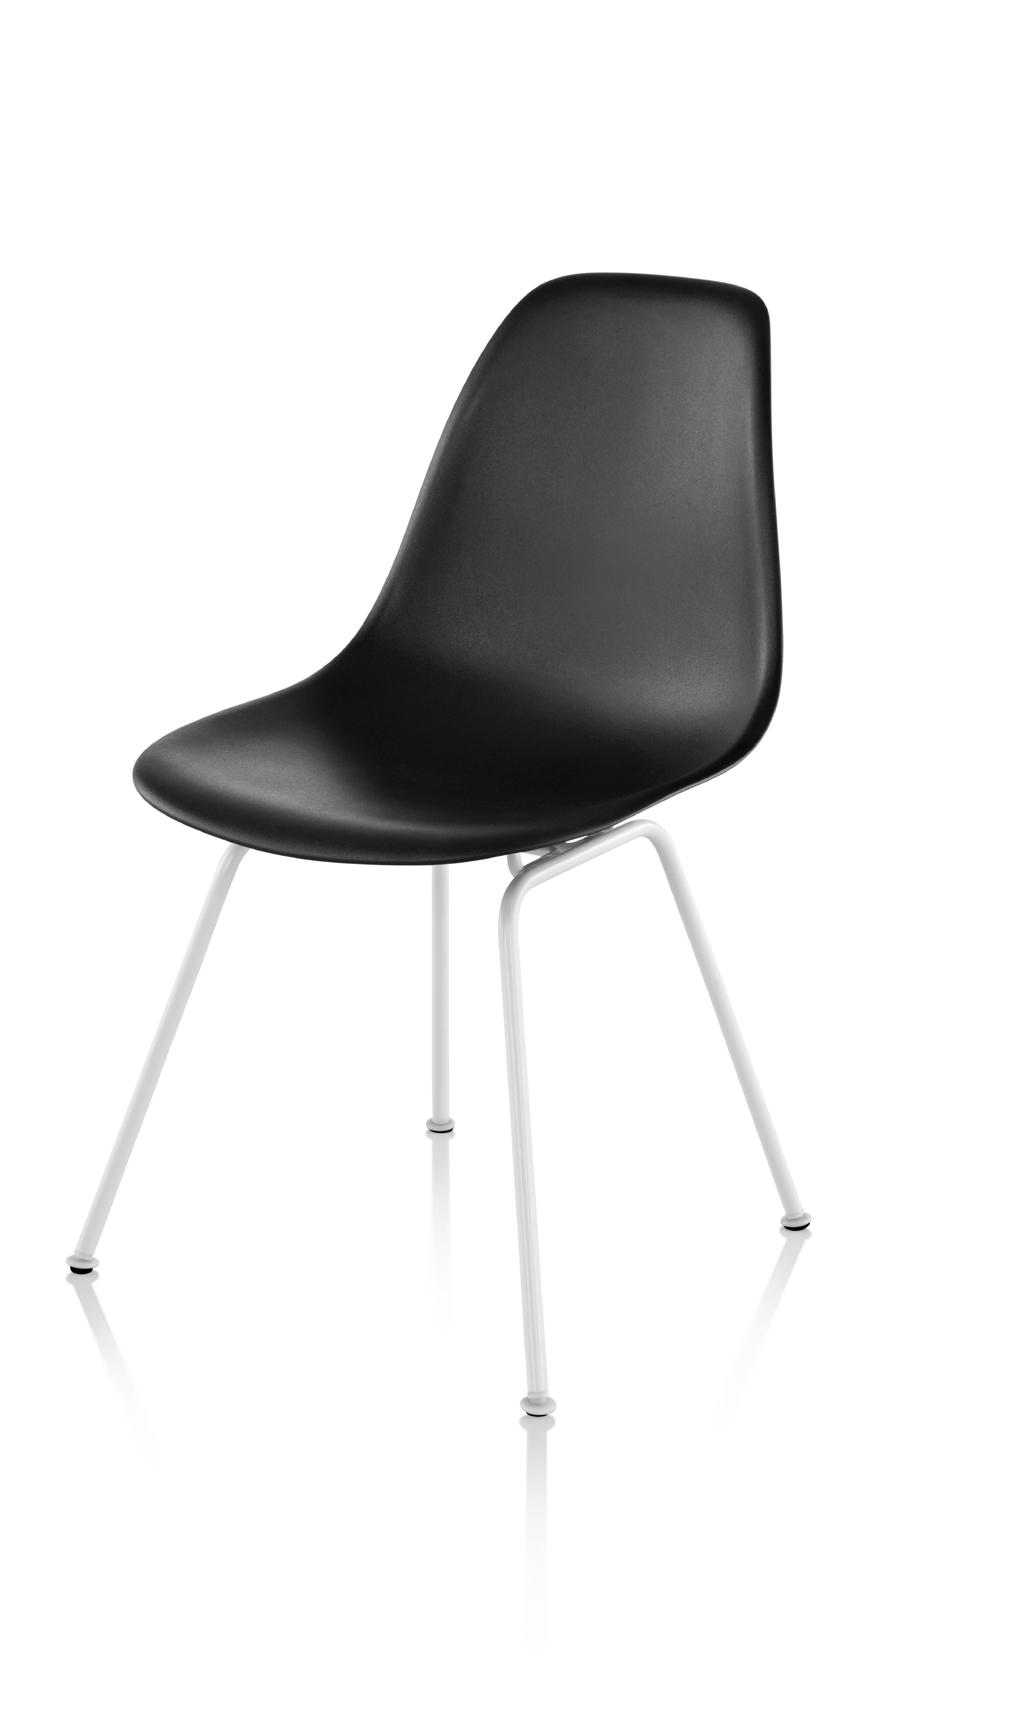 Eames Molded Plastic Side Chair 4-Leg Base Exemplifying the designers mantra of the best for the most for the least, molded plastic side chair is as stylish today as it